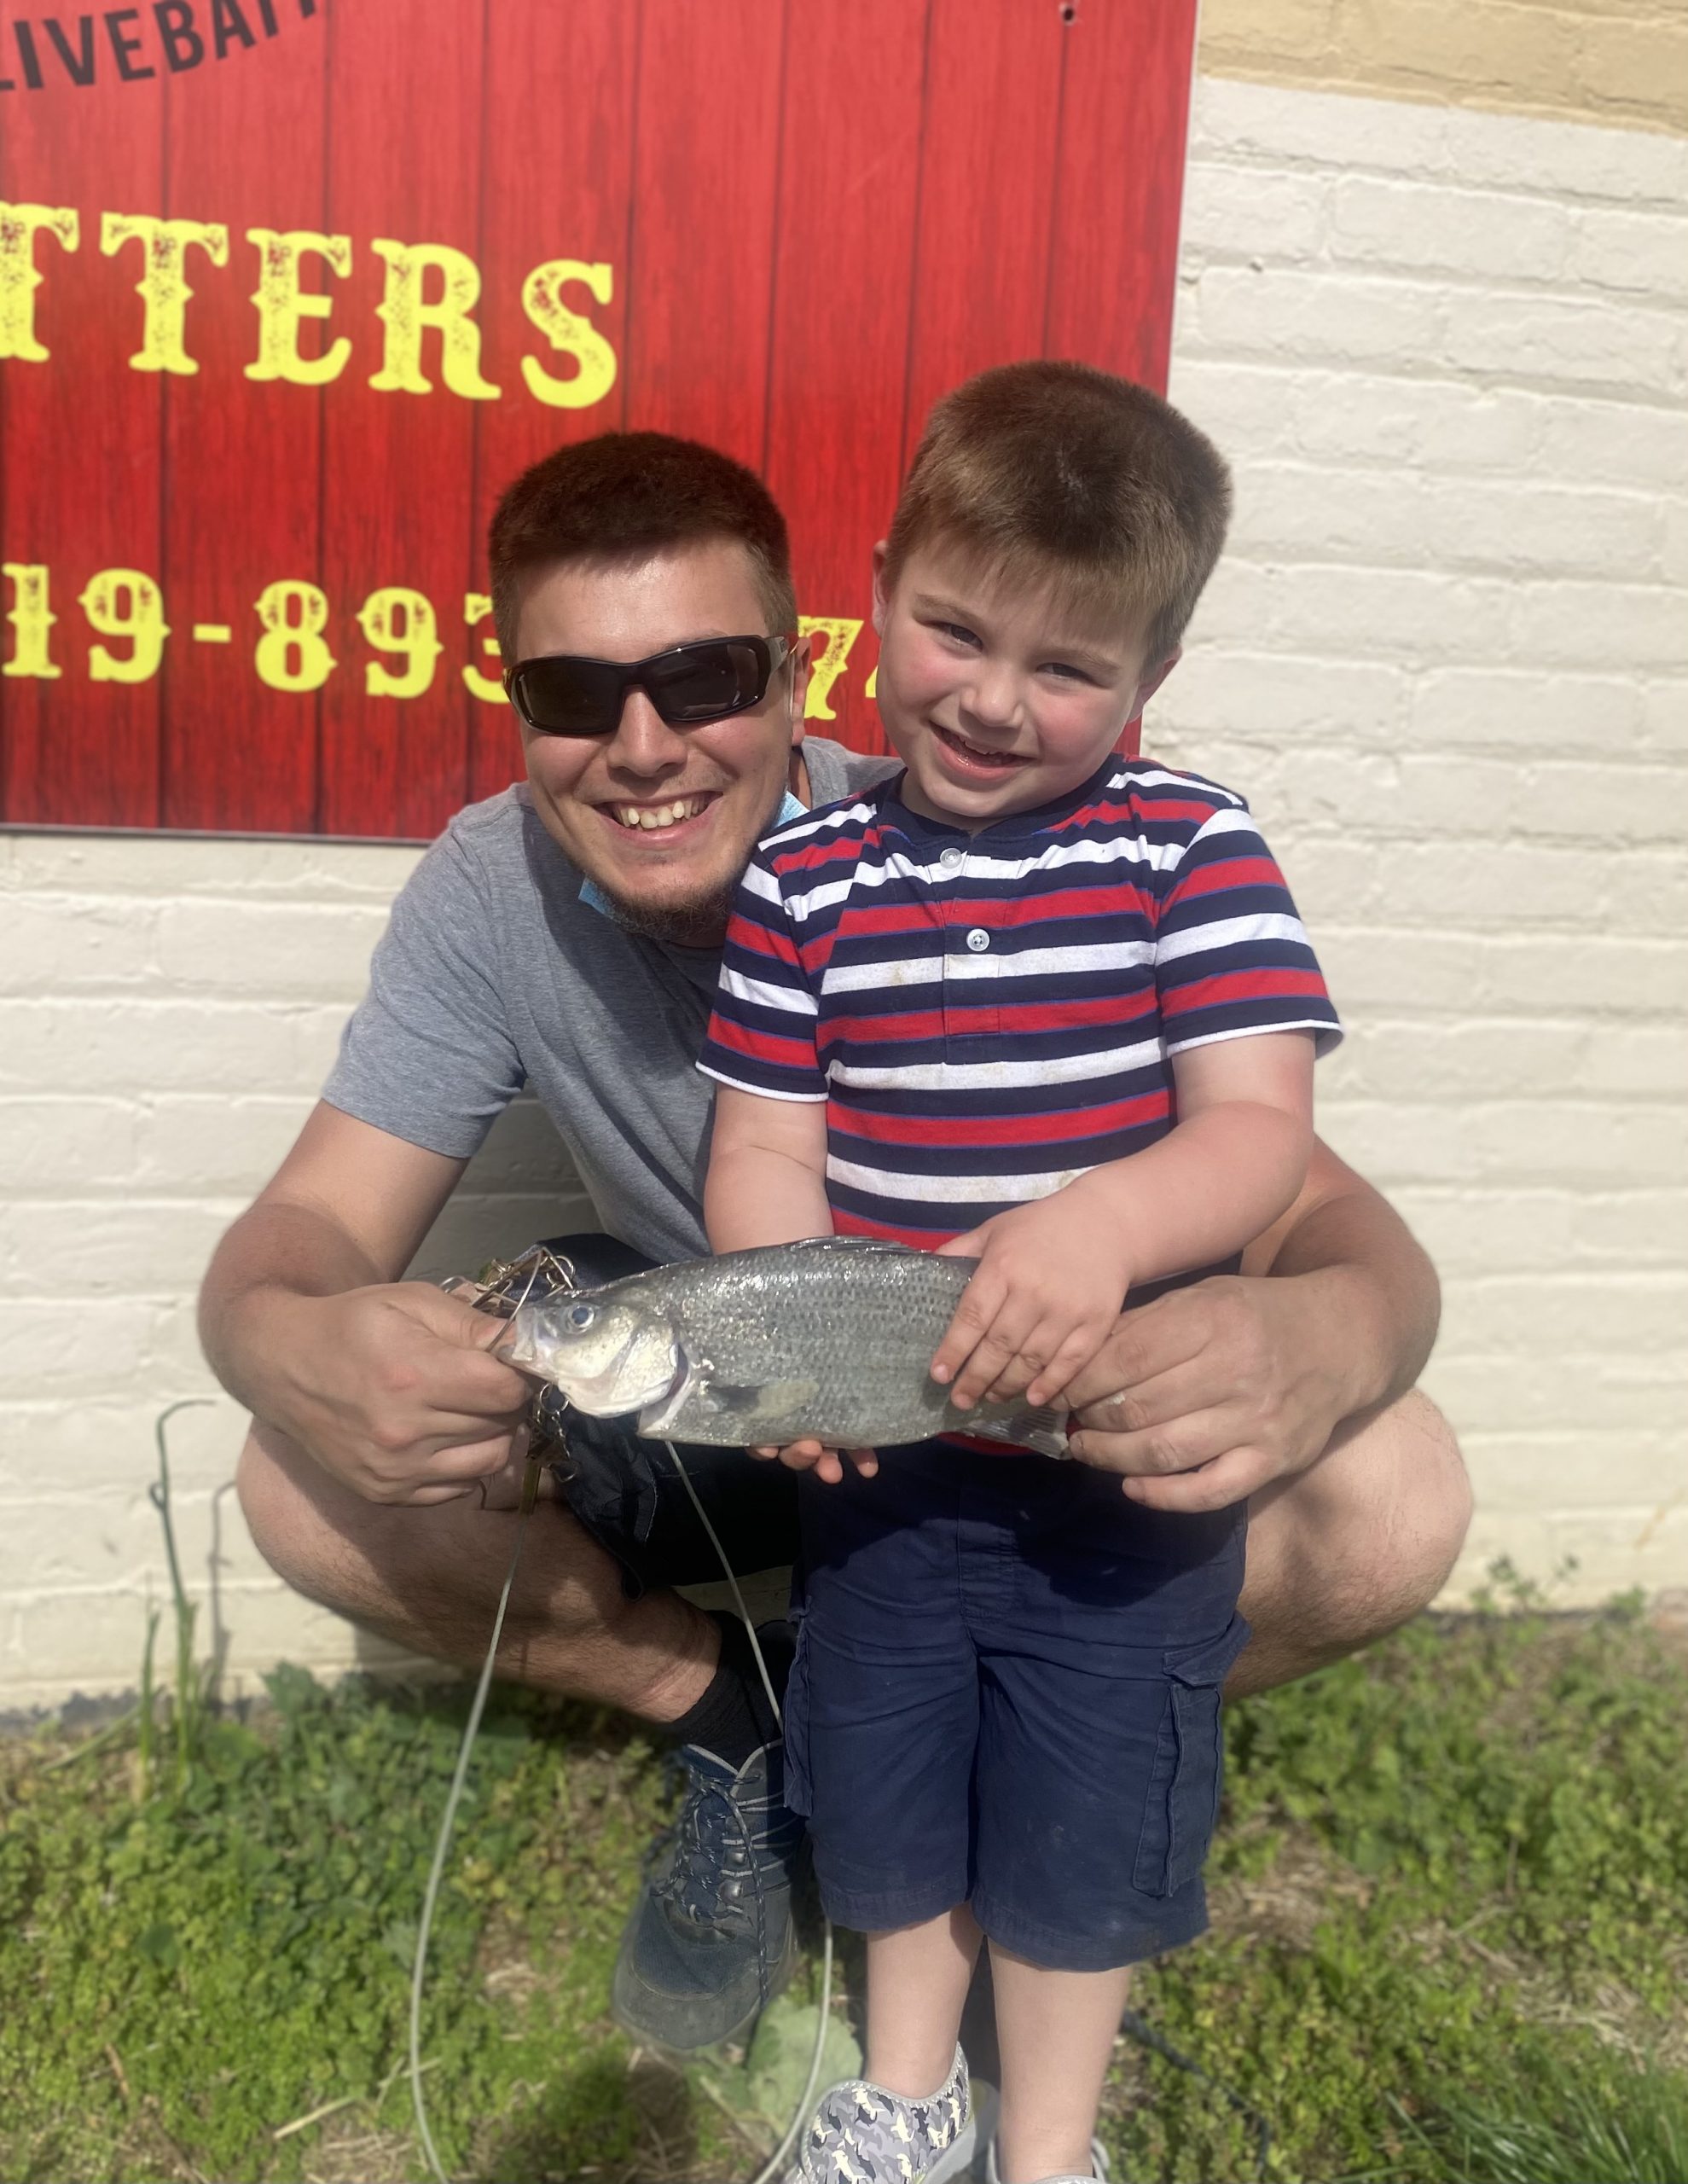 maumee river report- may 4,2021